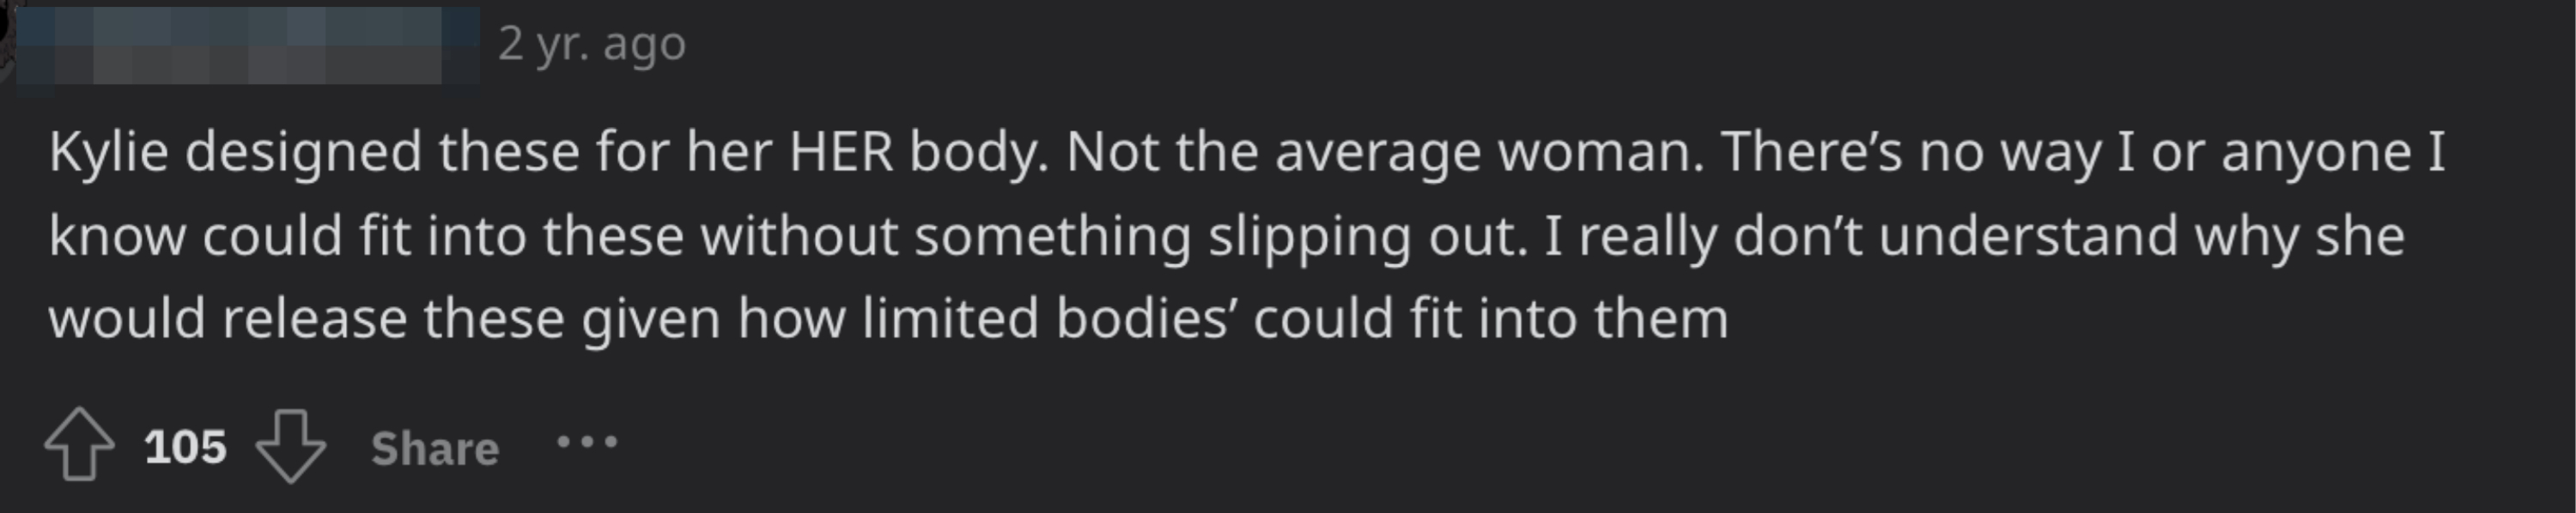 Screenshot of a comment criticizing Kylie Jenner&#x27;s clothing design for not fitting average body types